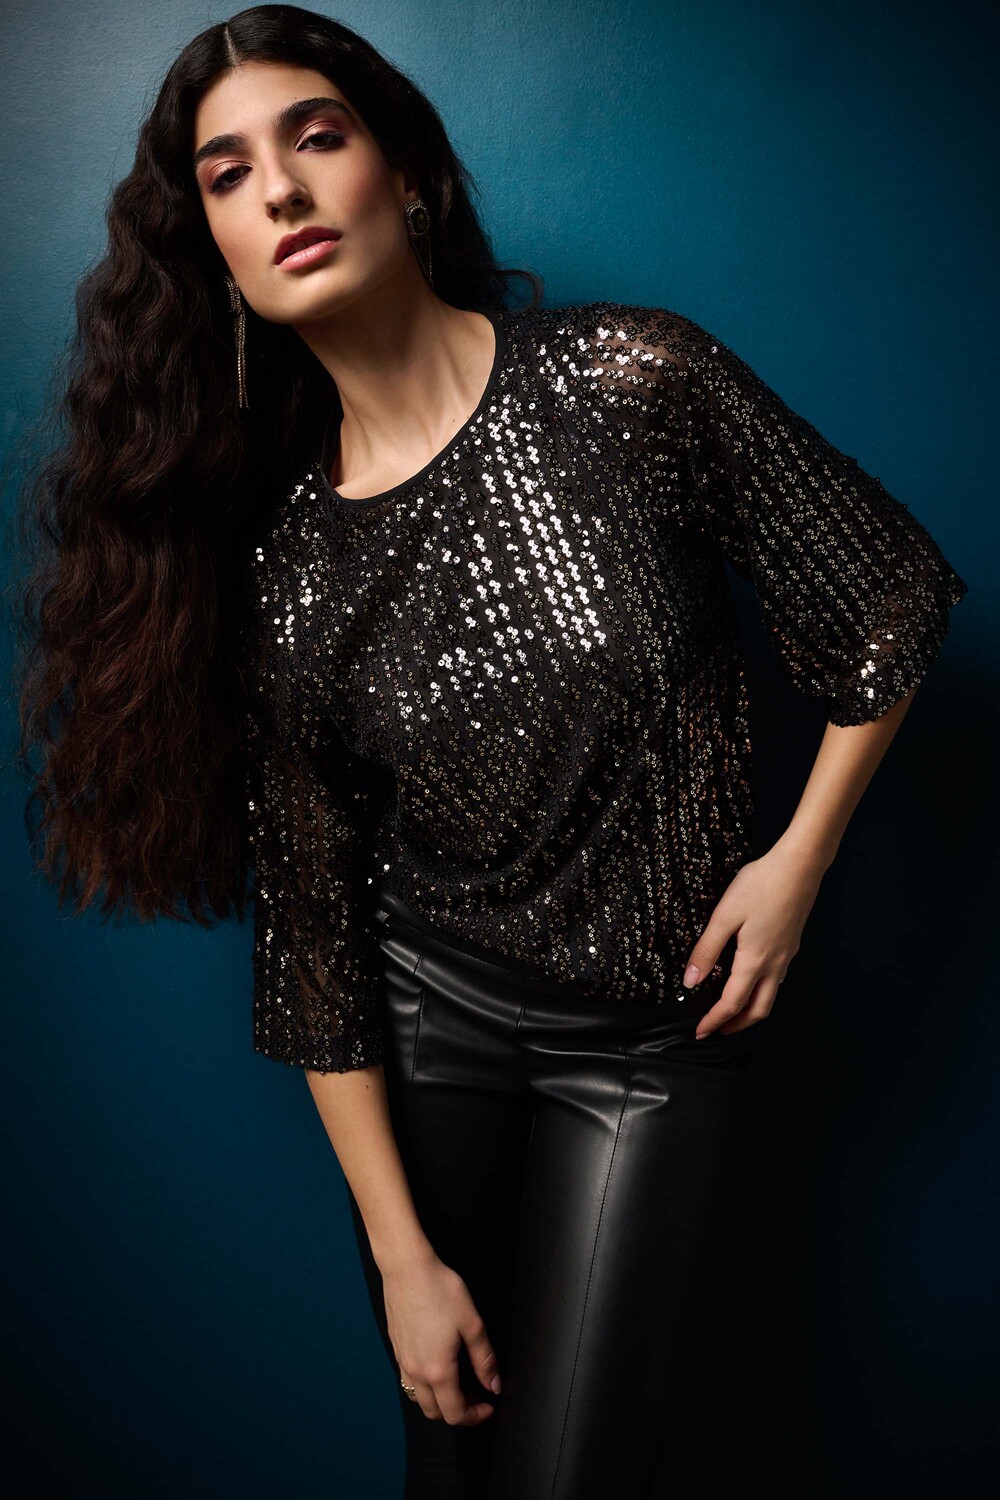 Sequin 3/4 Sleeve Top Style 234176. Black/gold